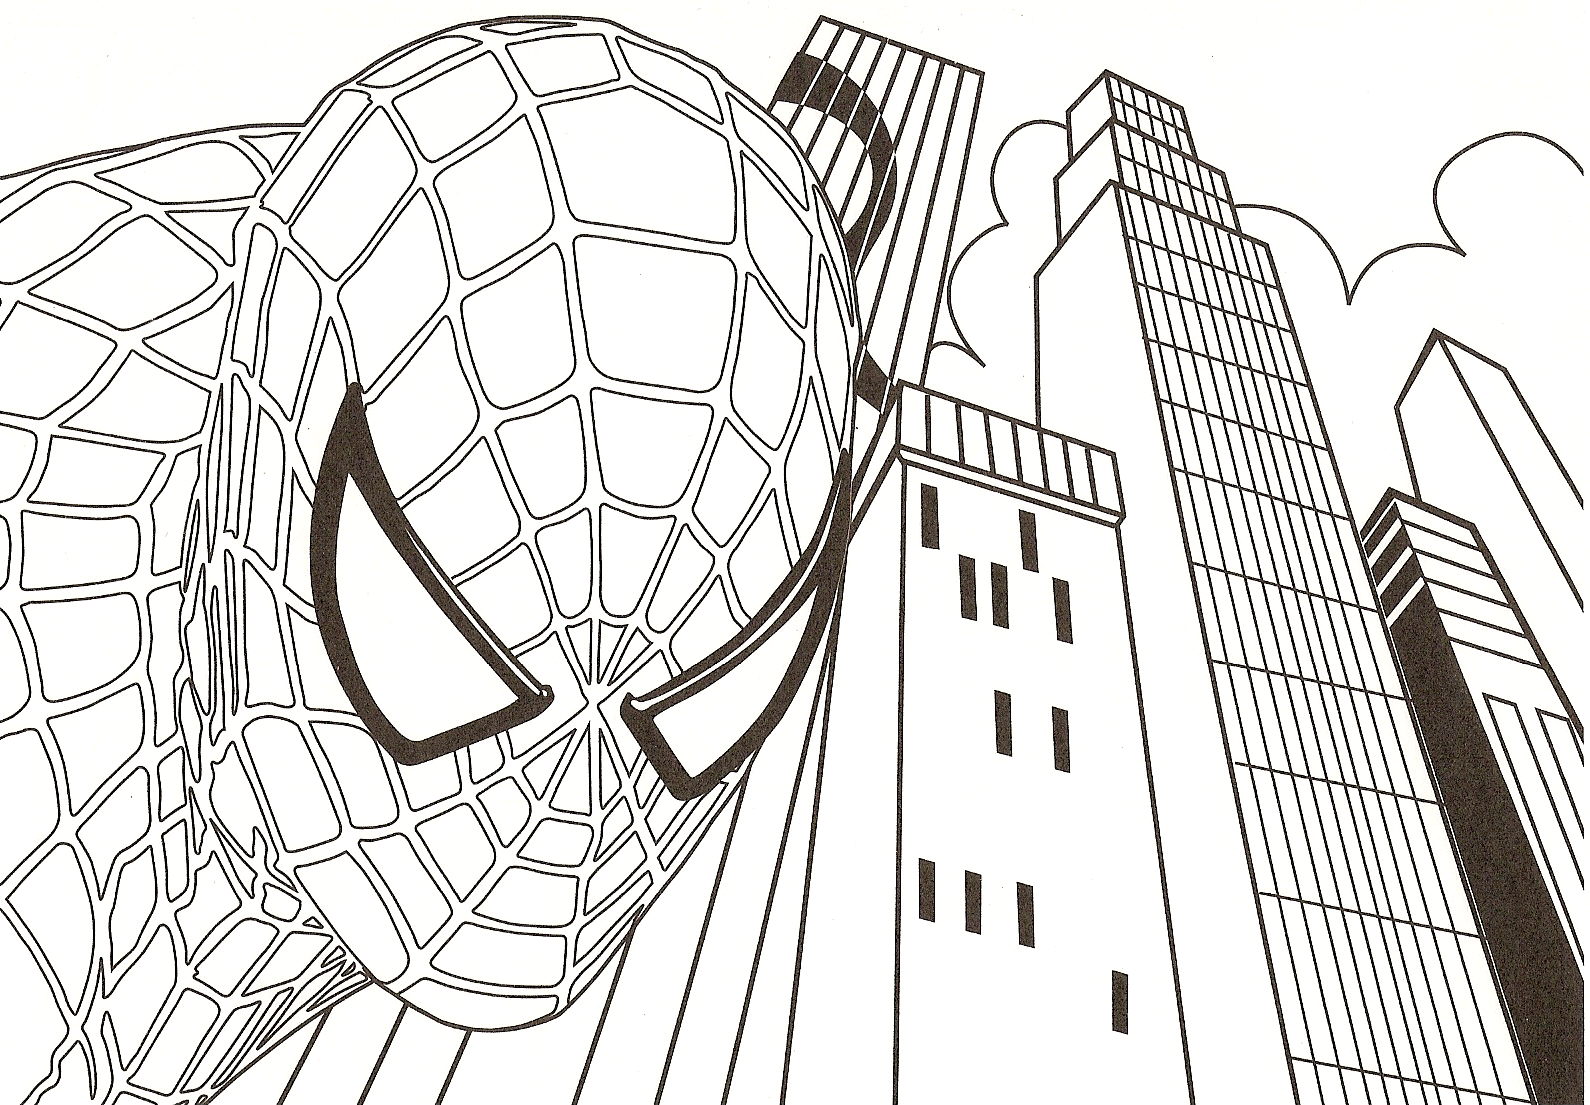 SPIDERMAN COLORING: SPIDERMAN COLOURING BOOK PAGES TO 